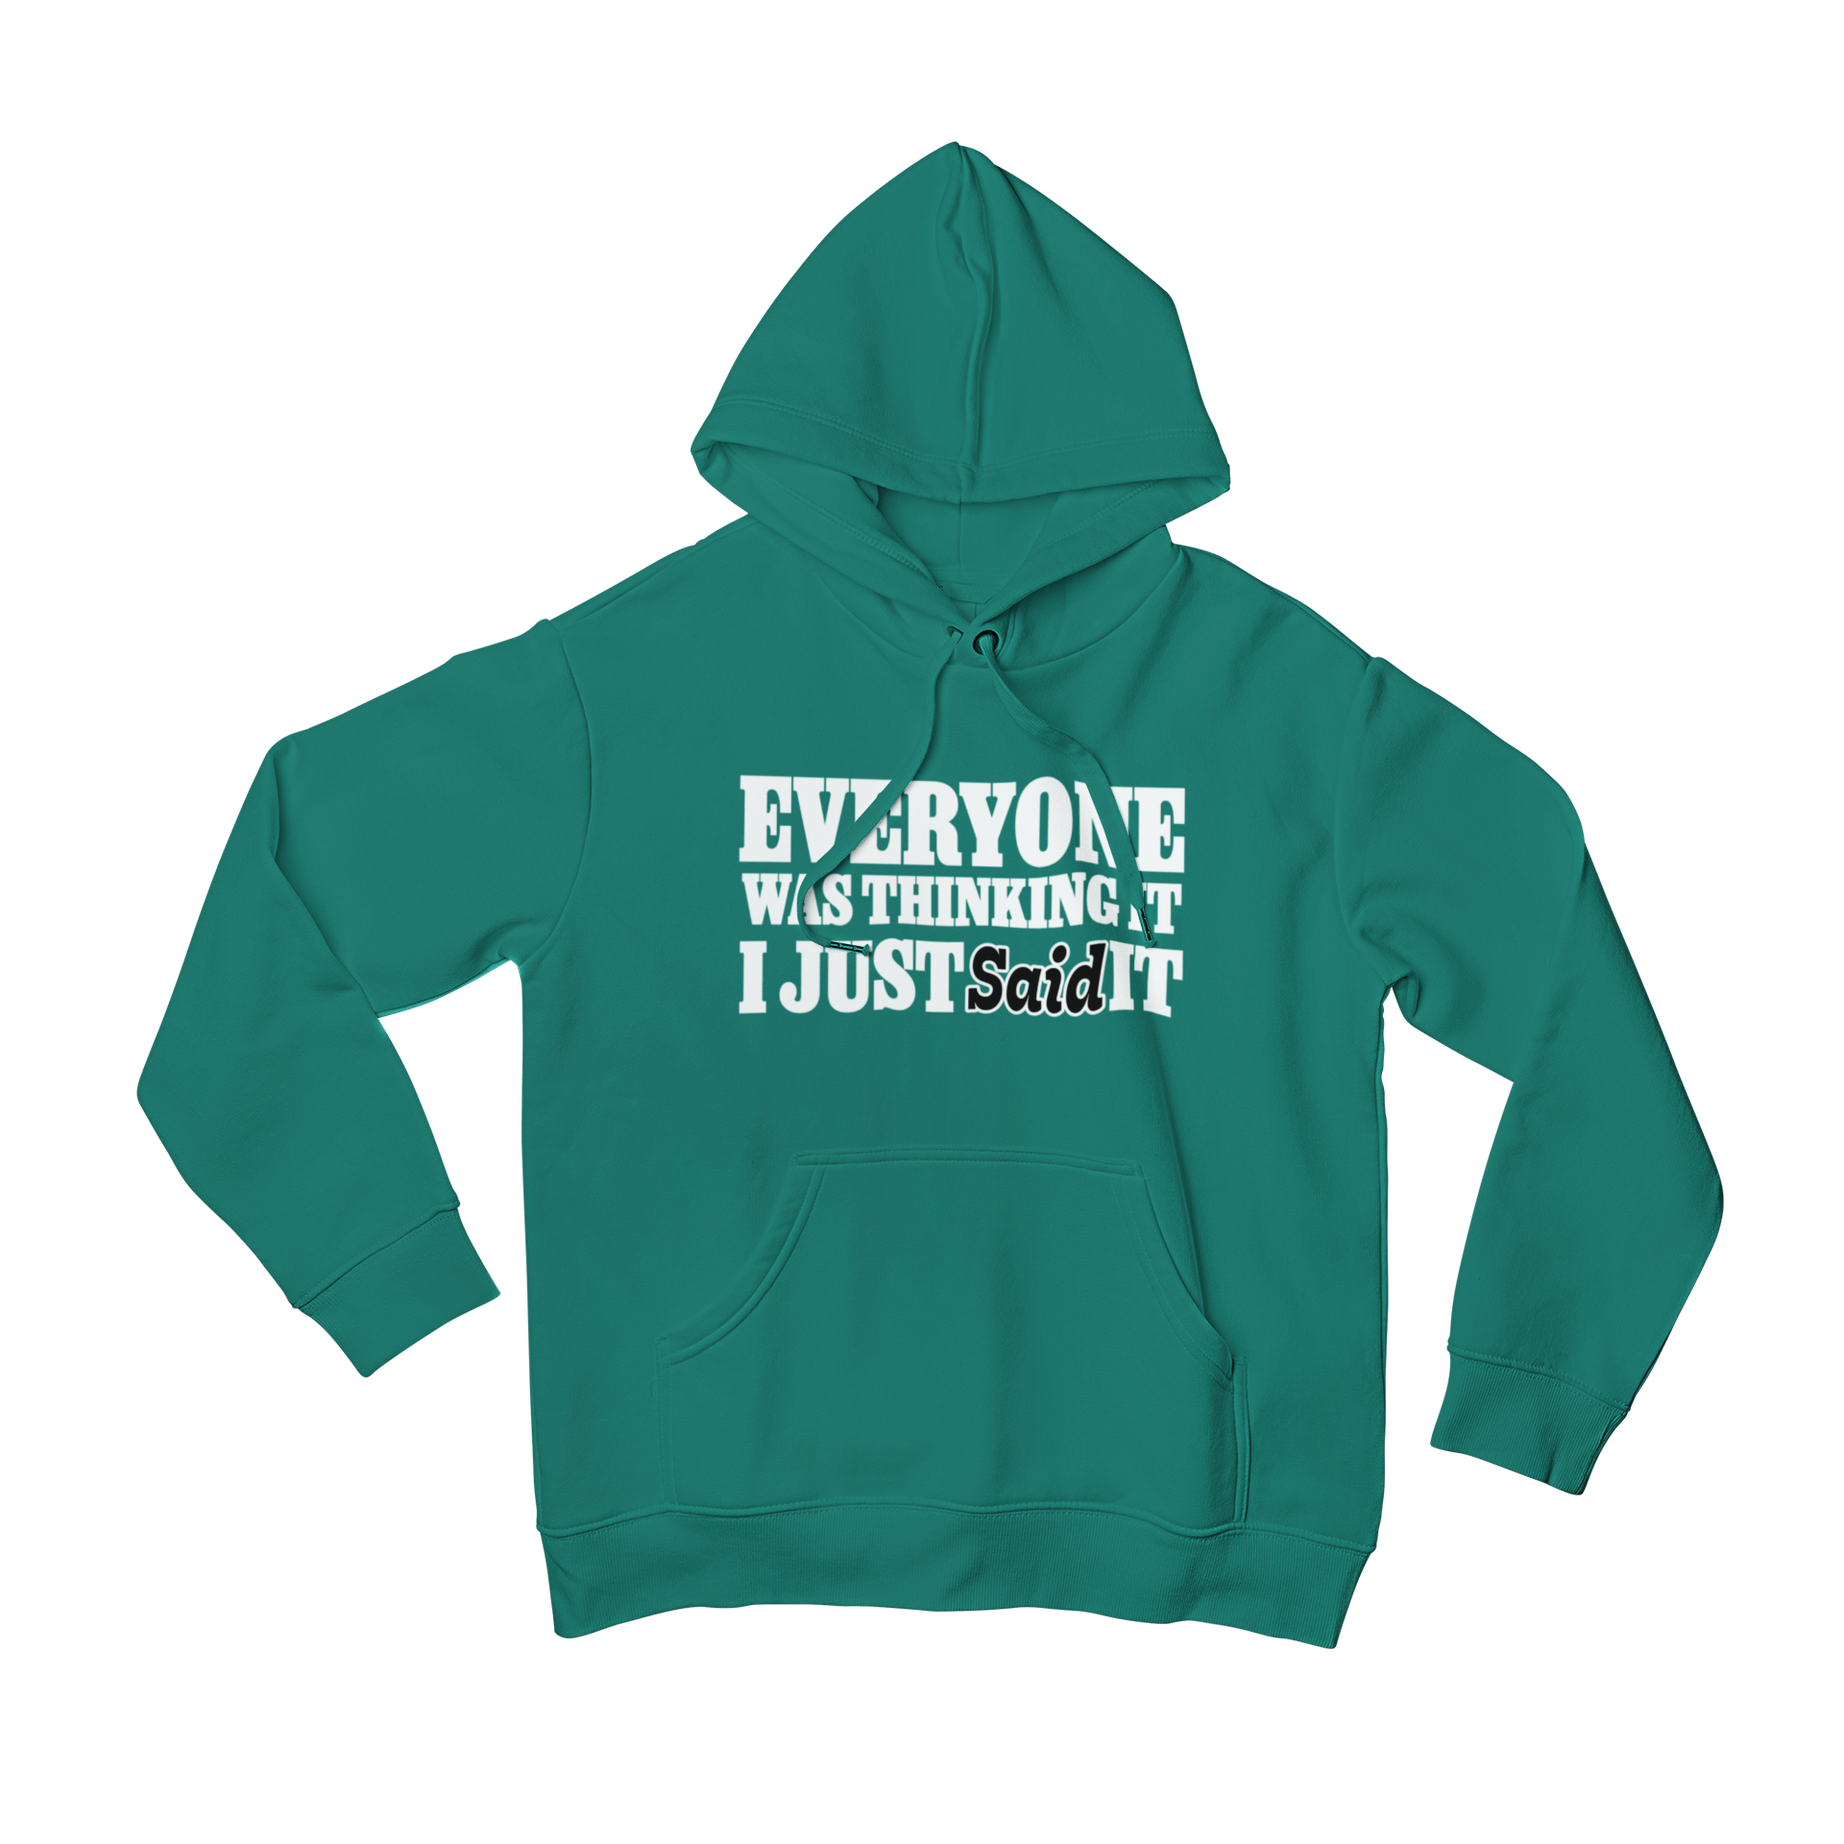 Rock the Everyone's Thinking Front Print Hoodie and make a bold statement without saying a word. This hoodie features a front print slogan that says "Everyone was thinking it, I just said it." Perfect for those who don't take themselves too seriously and want to add a touch of humour to their wardrobe.